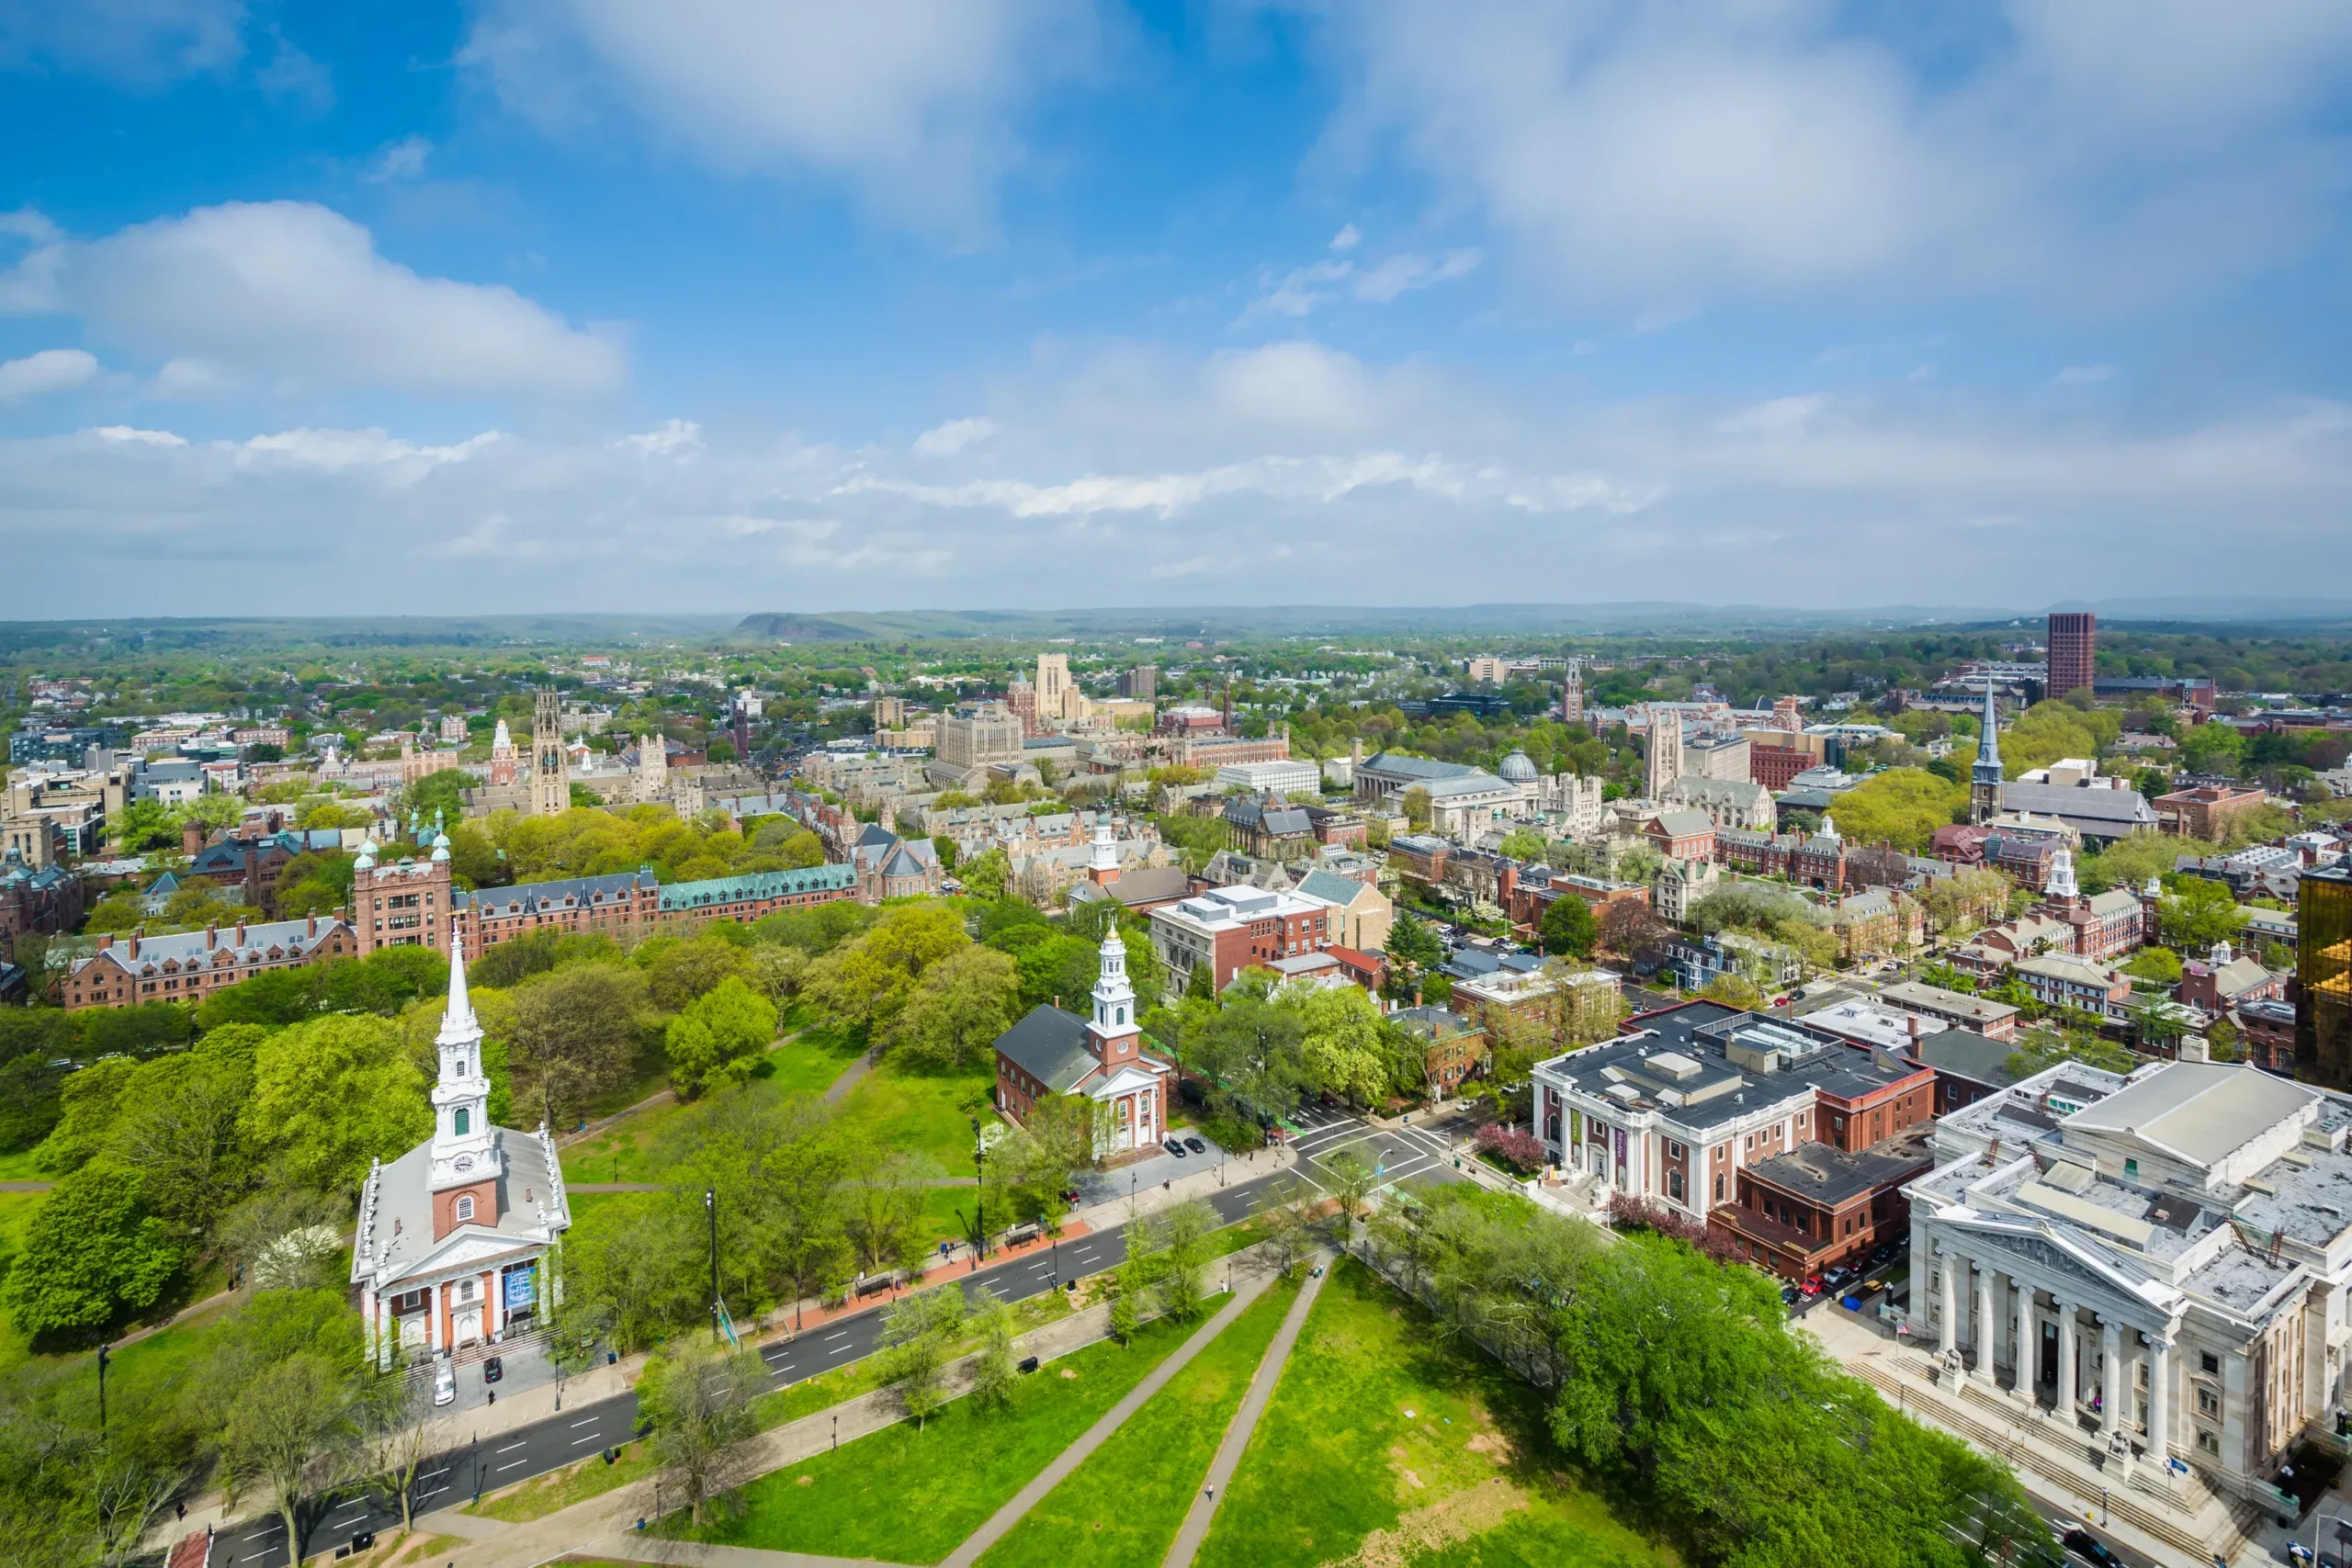 New Haven, Connecticut has the highest cancer rates in the state.